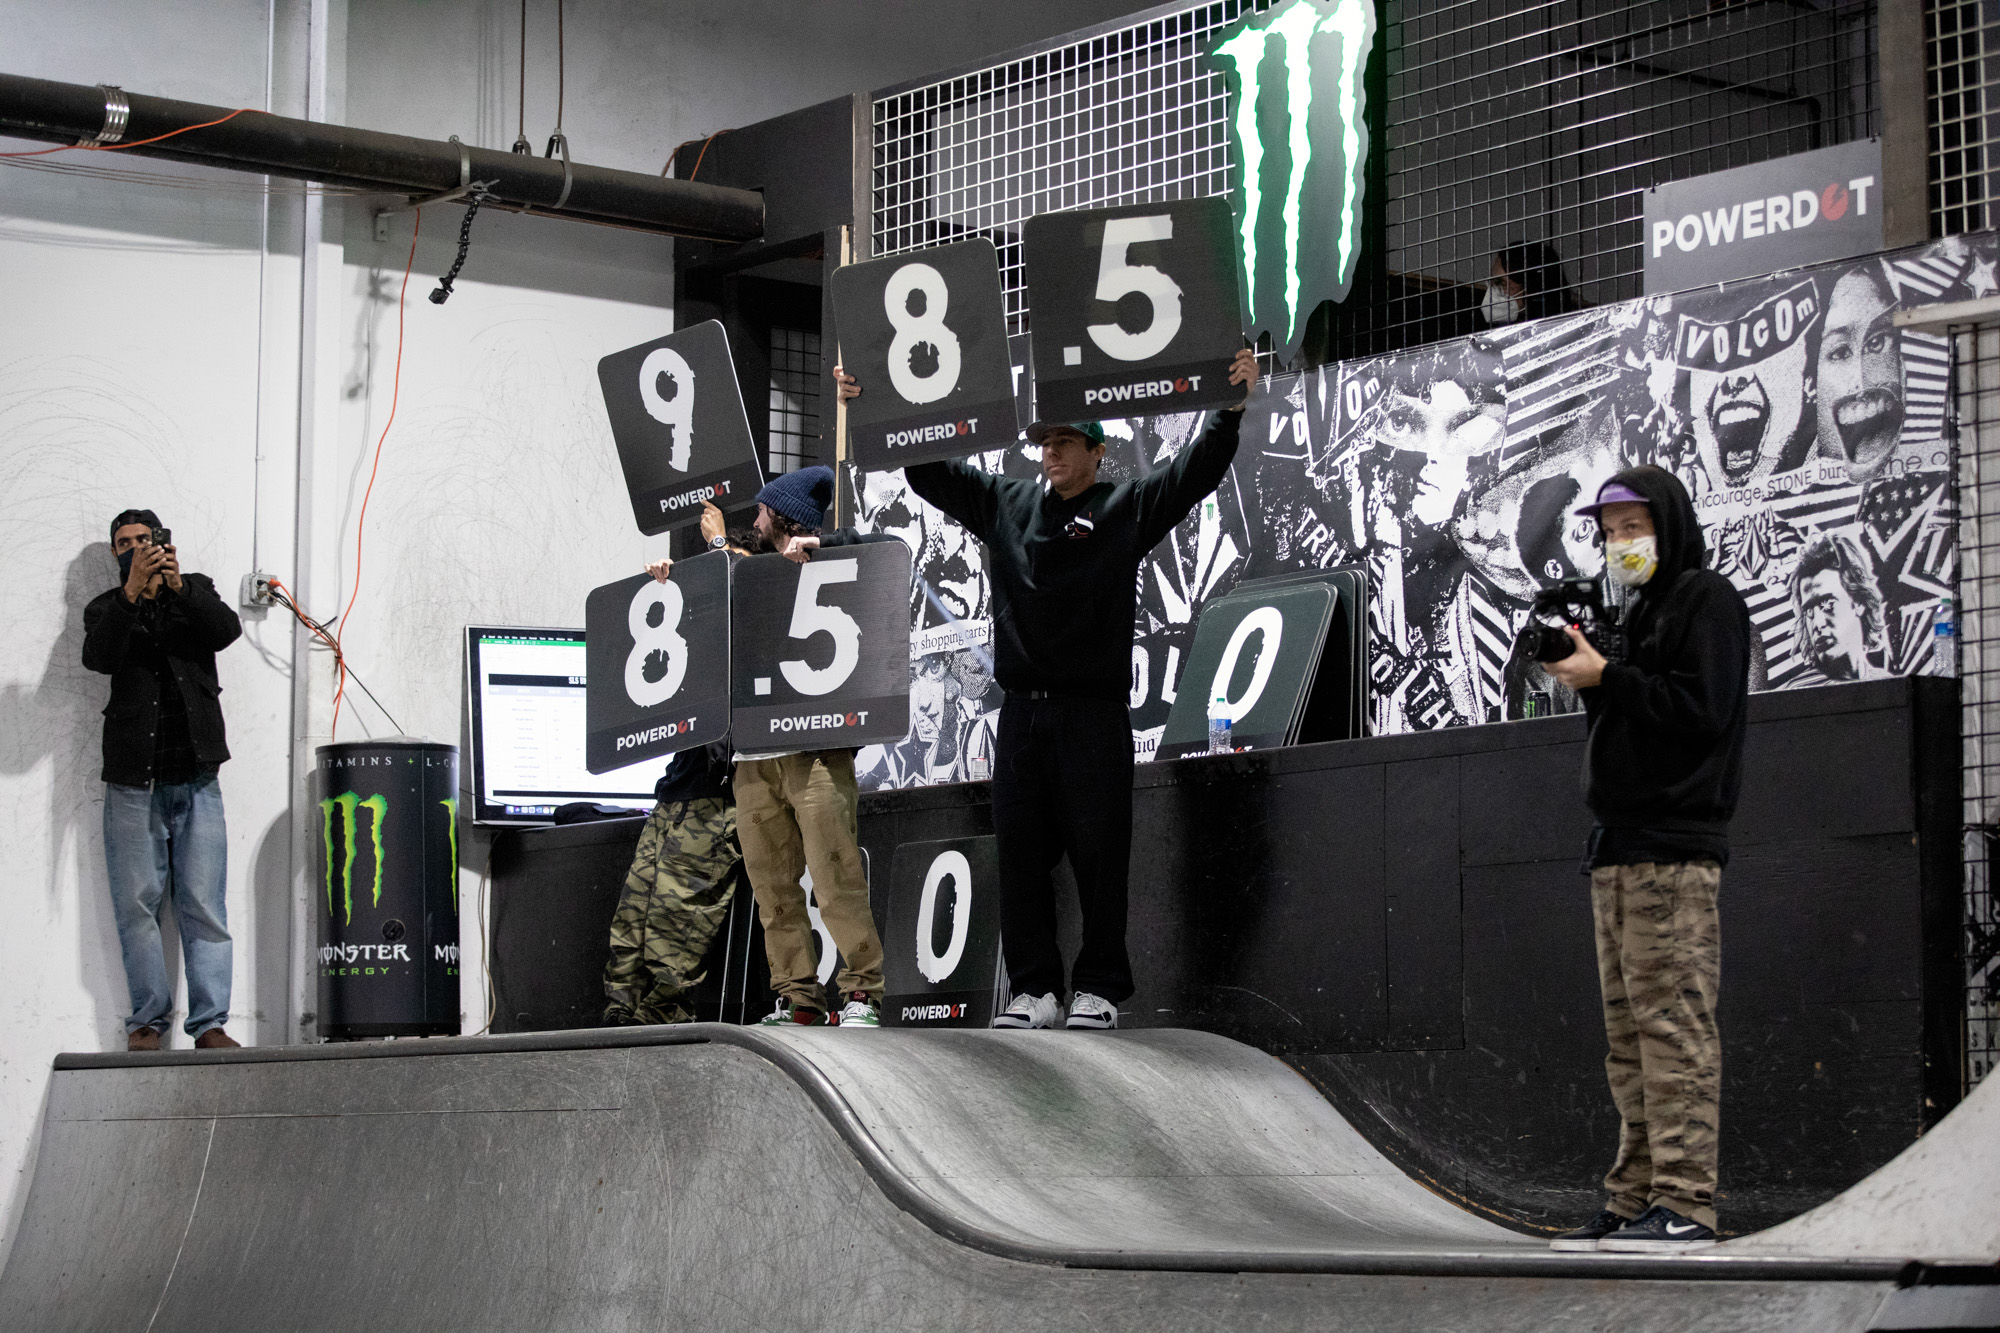 Monster Energy’s Ishod Wair's Score After Taking First Place in Street League Skateboarding “Unsanctioned 2” Pro Skateboarding Contest at Volcom Skatepark